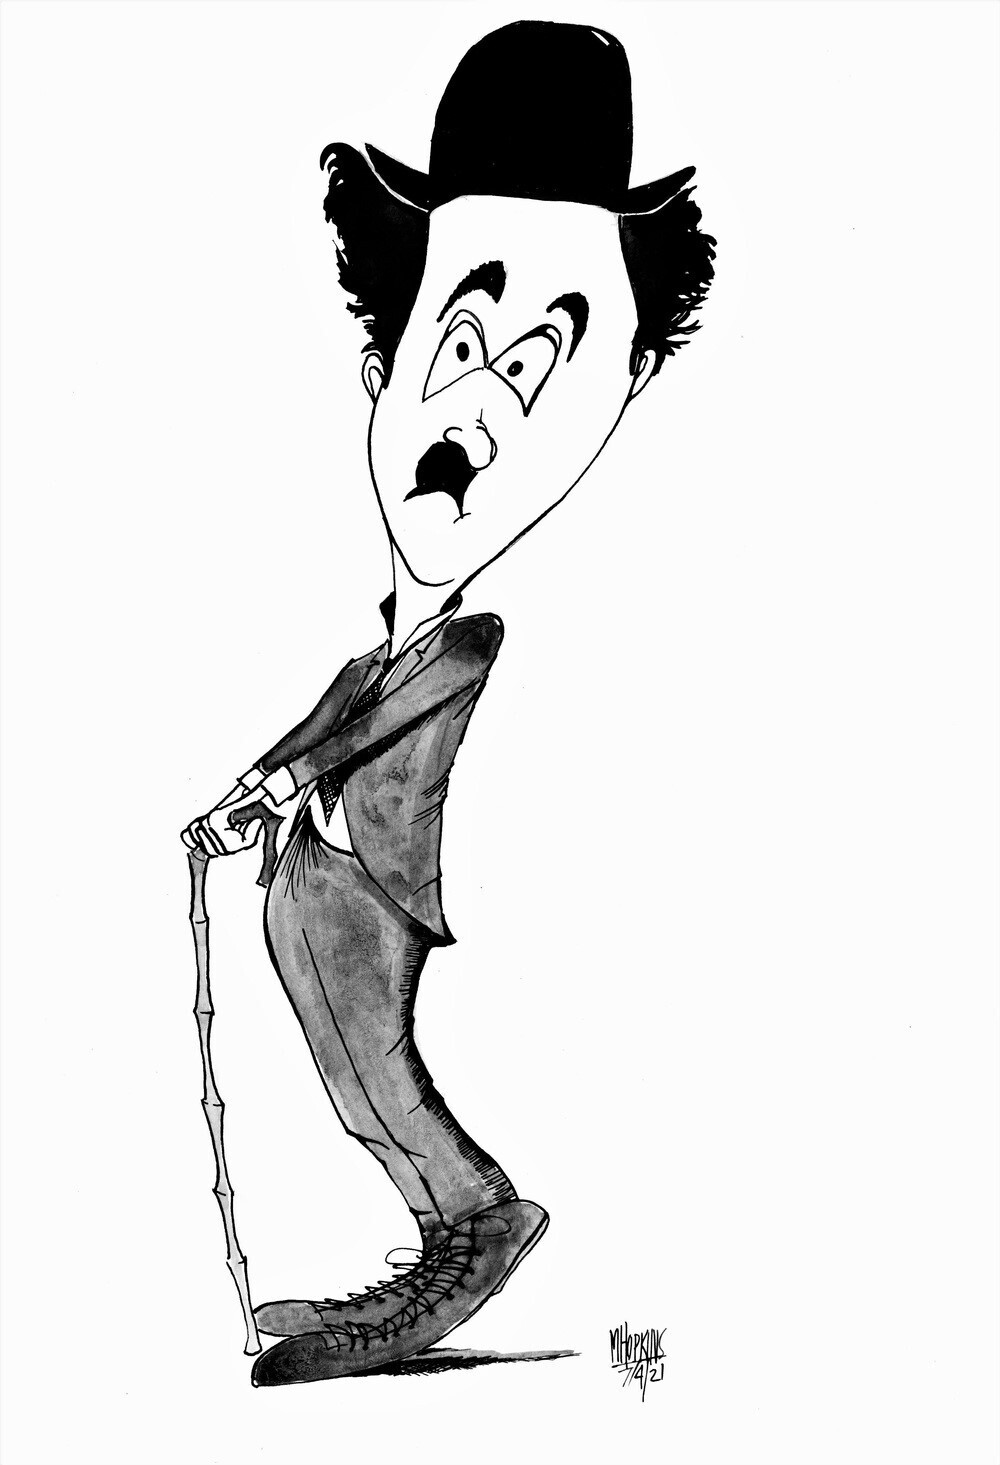 Chaplin - Limited Edition Signed Giclée Prints from $50.00 to $200.00